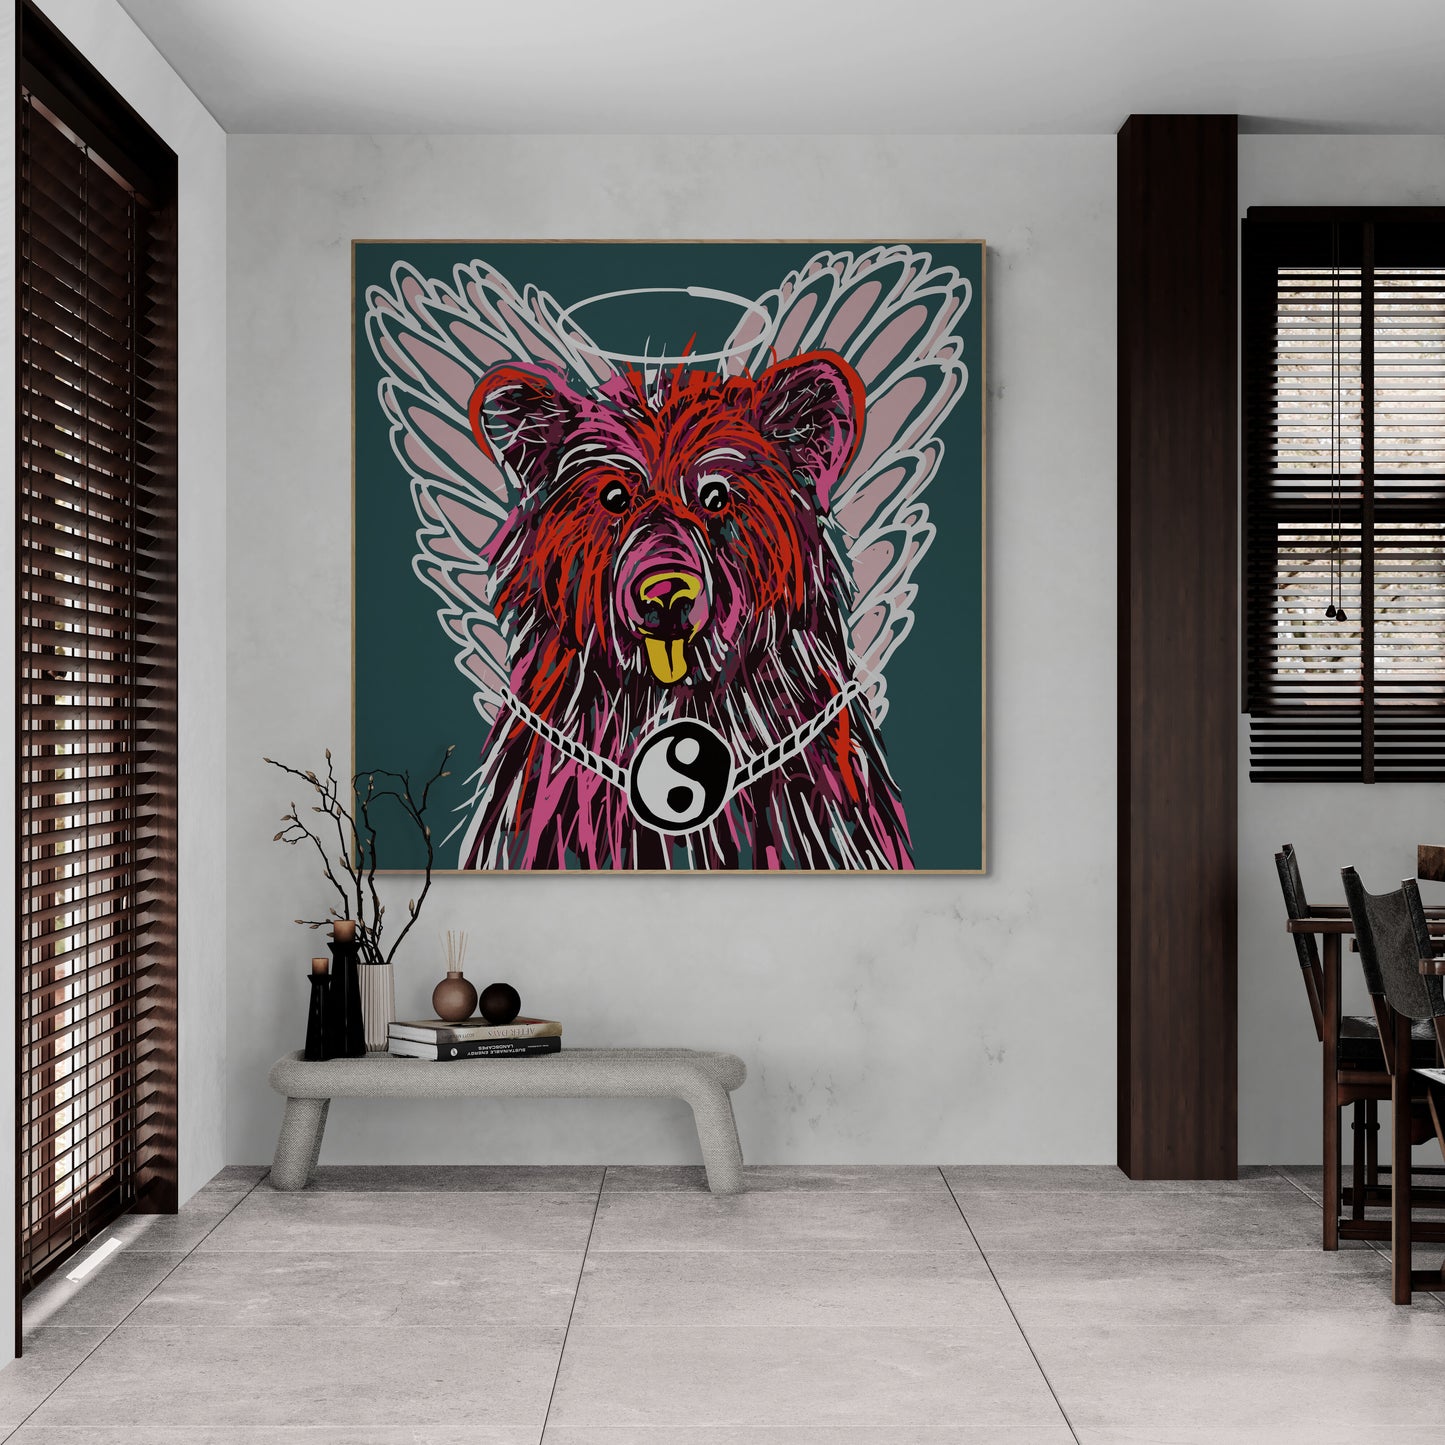 Abstract bear graphic design canvas art print with artistic finish wall art Scandinavian style